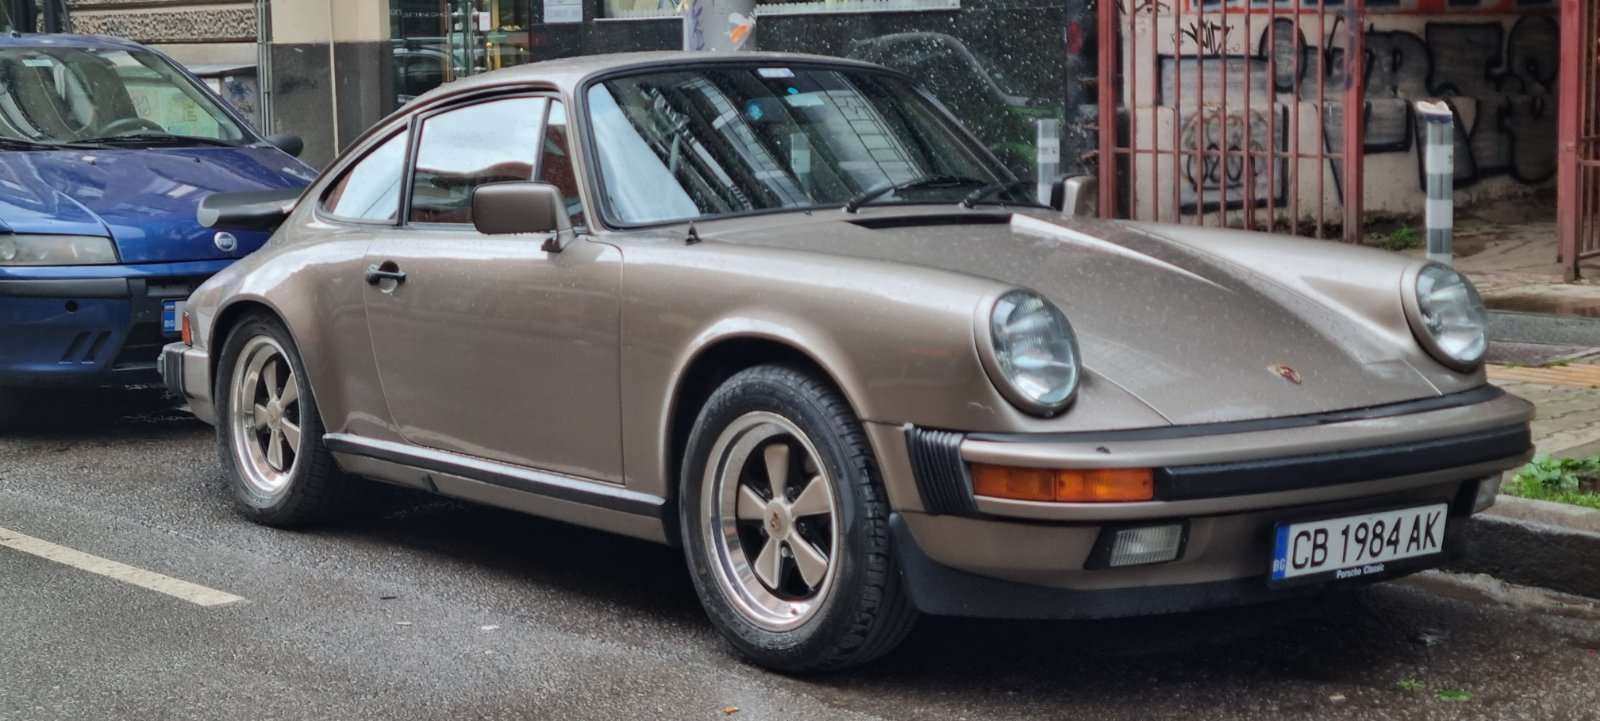 Porsche old puzzle online from photo